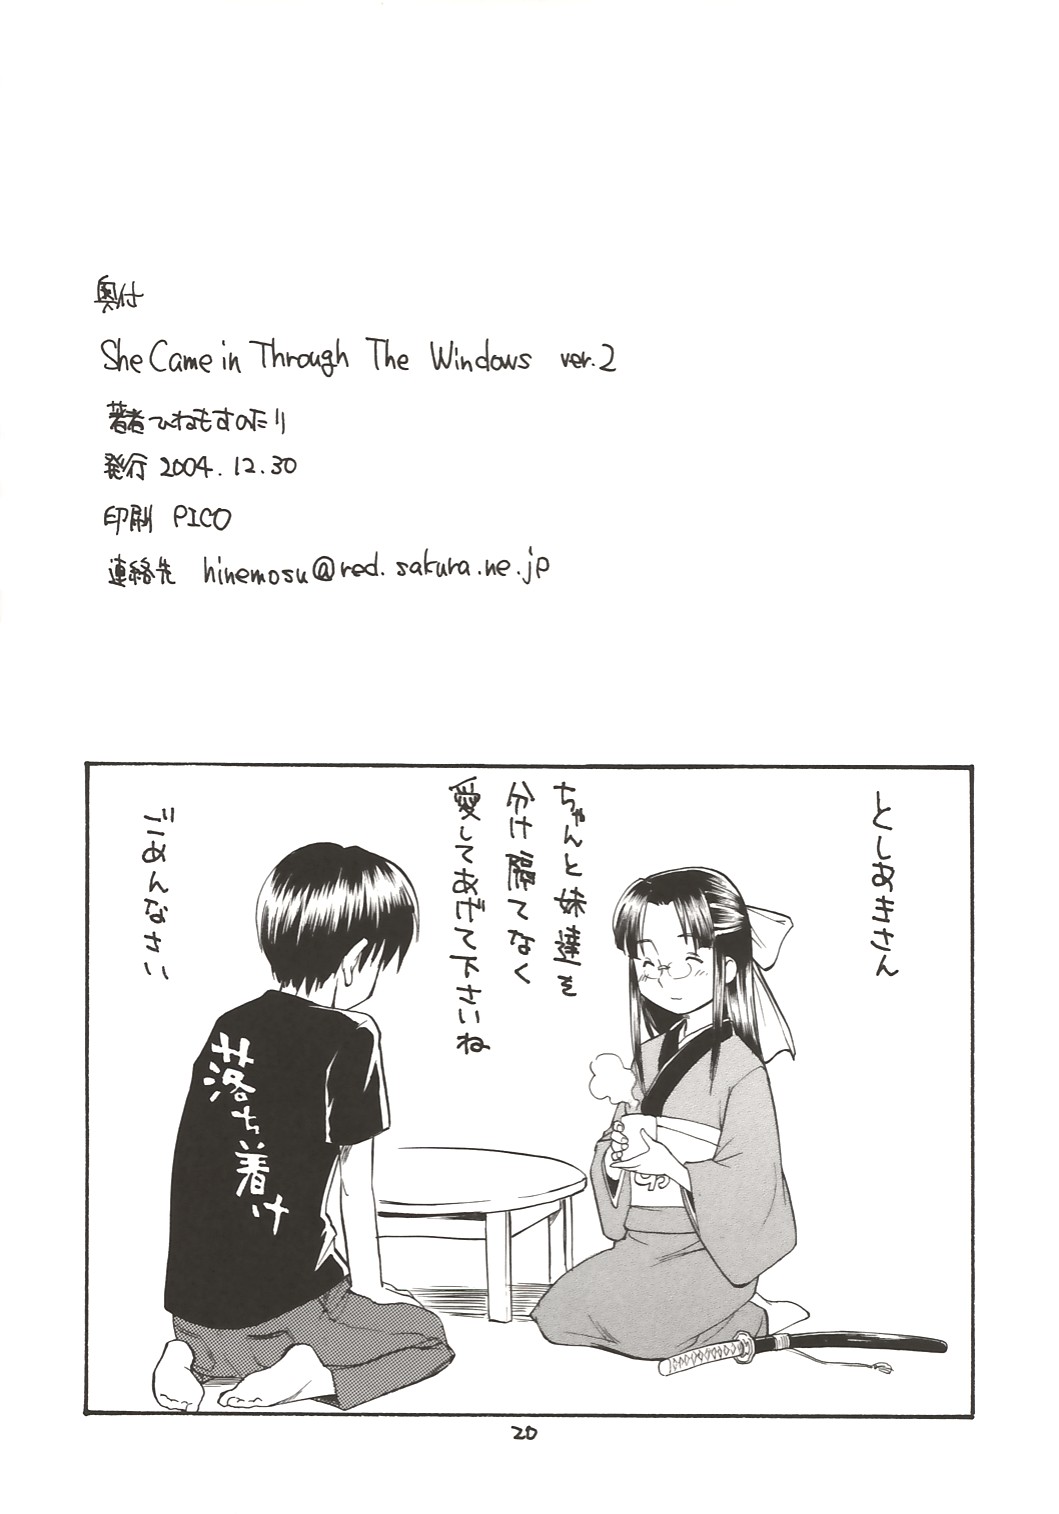 (C67) [終日庵 (ひねもすのたり)] She Came in Through The Windows Ver.2 (OSたん)